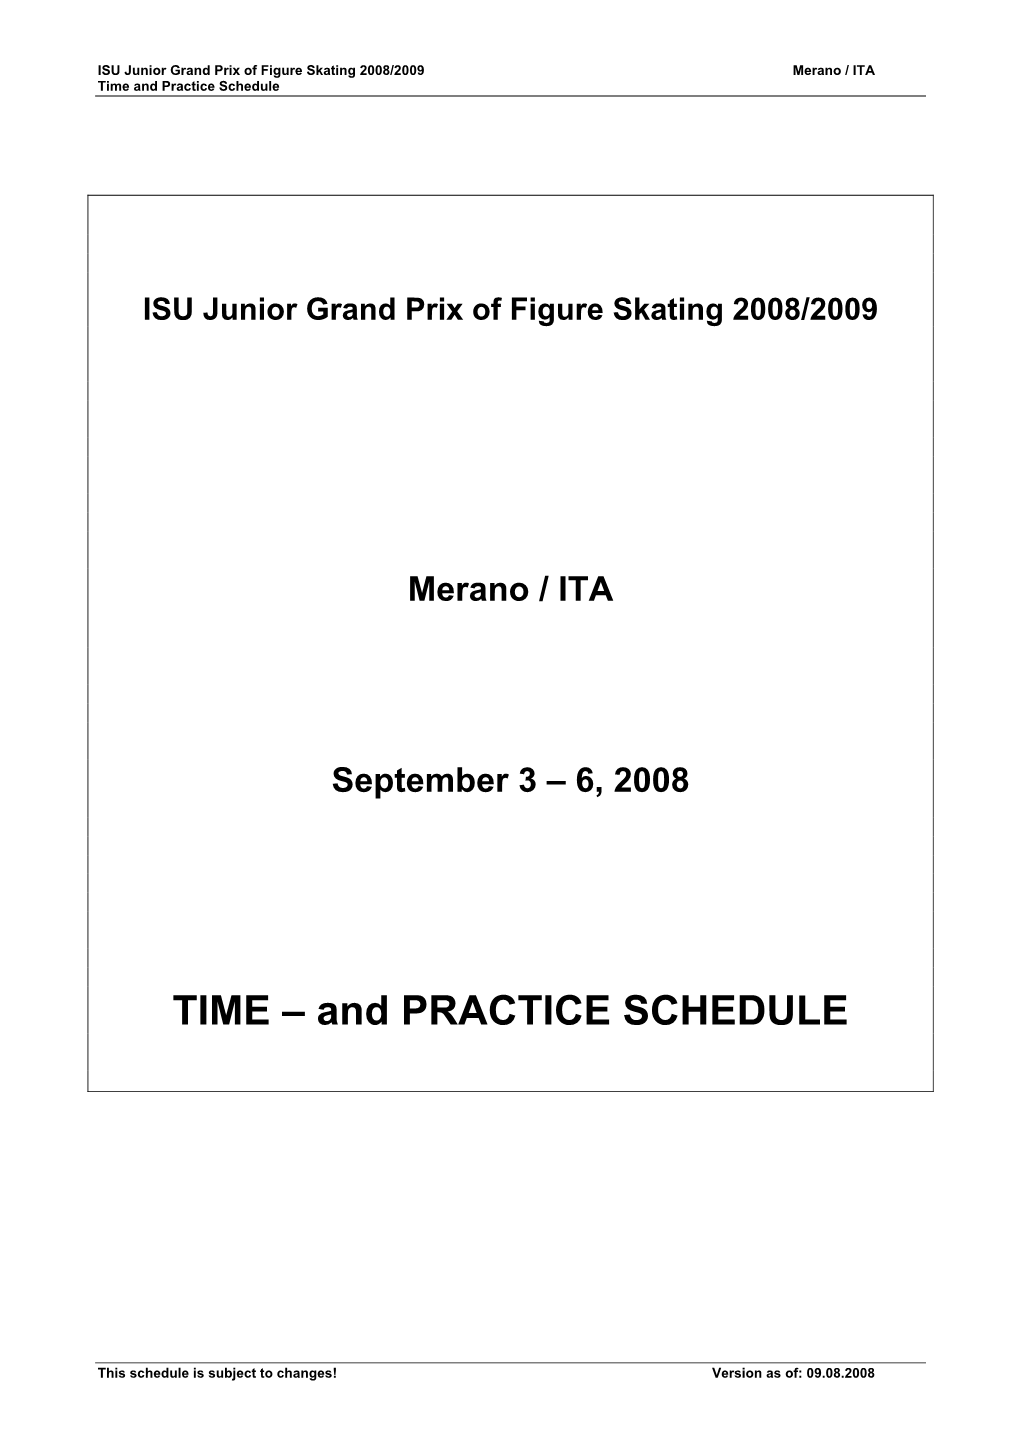 TIME – and PRACTICE SCHEDULE